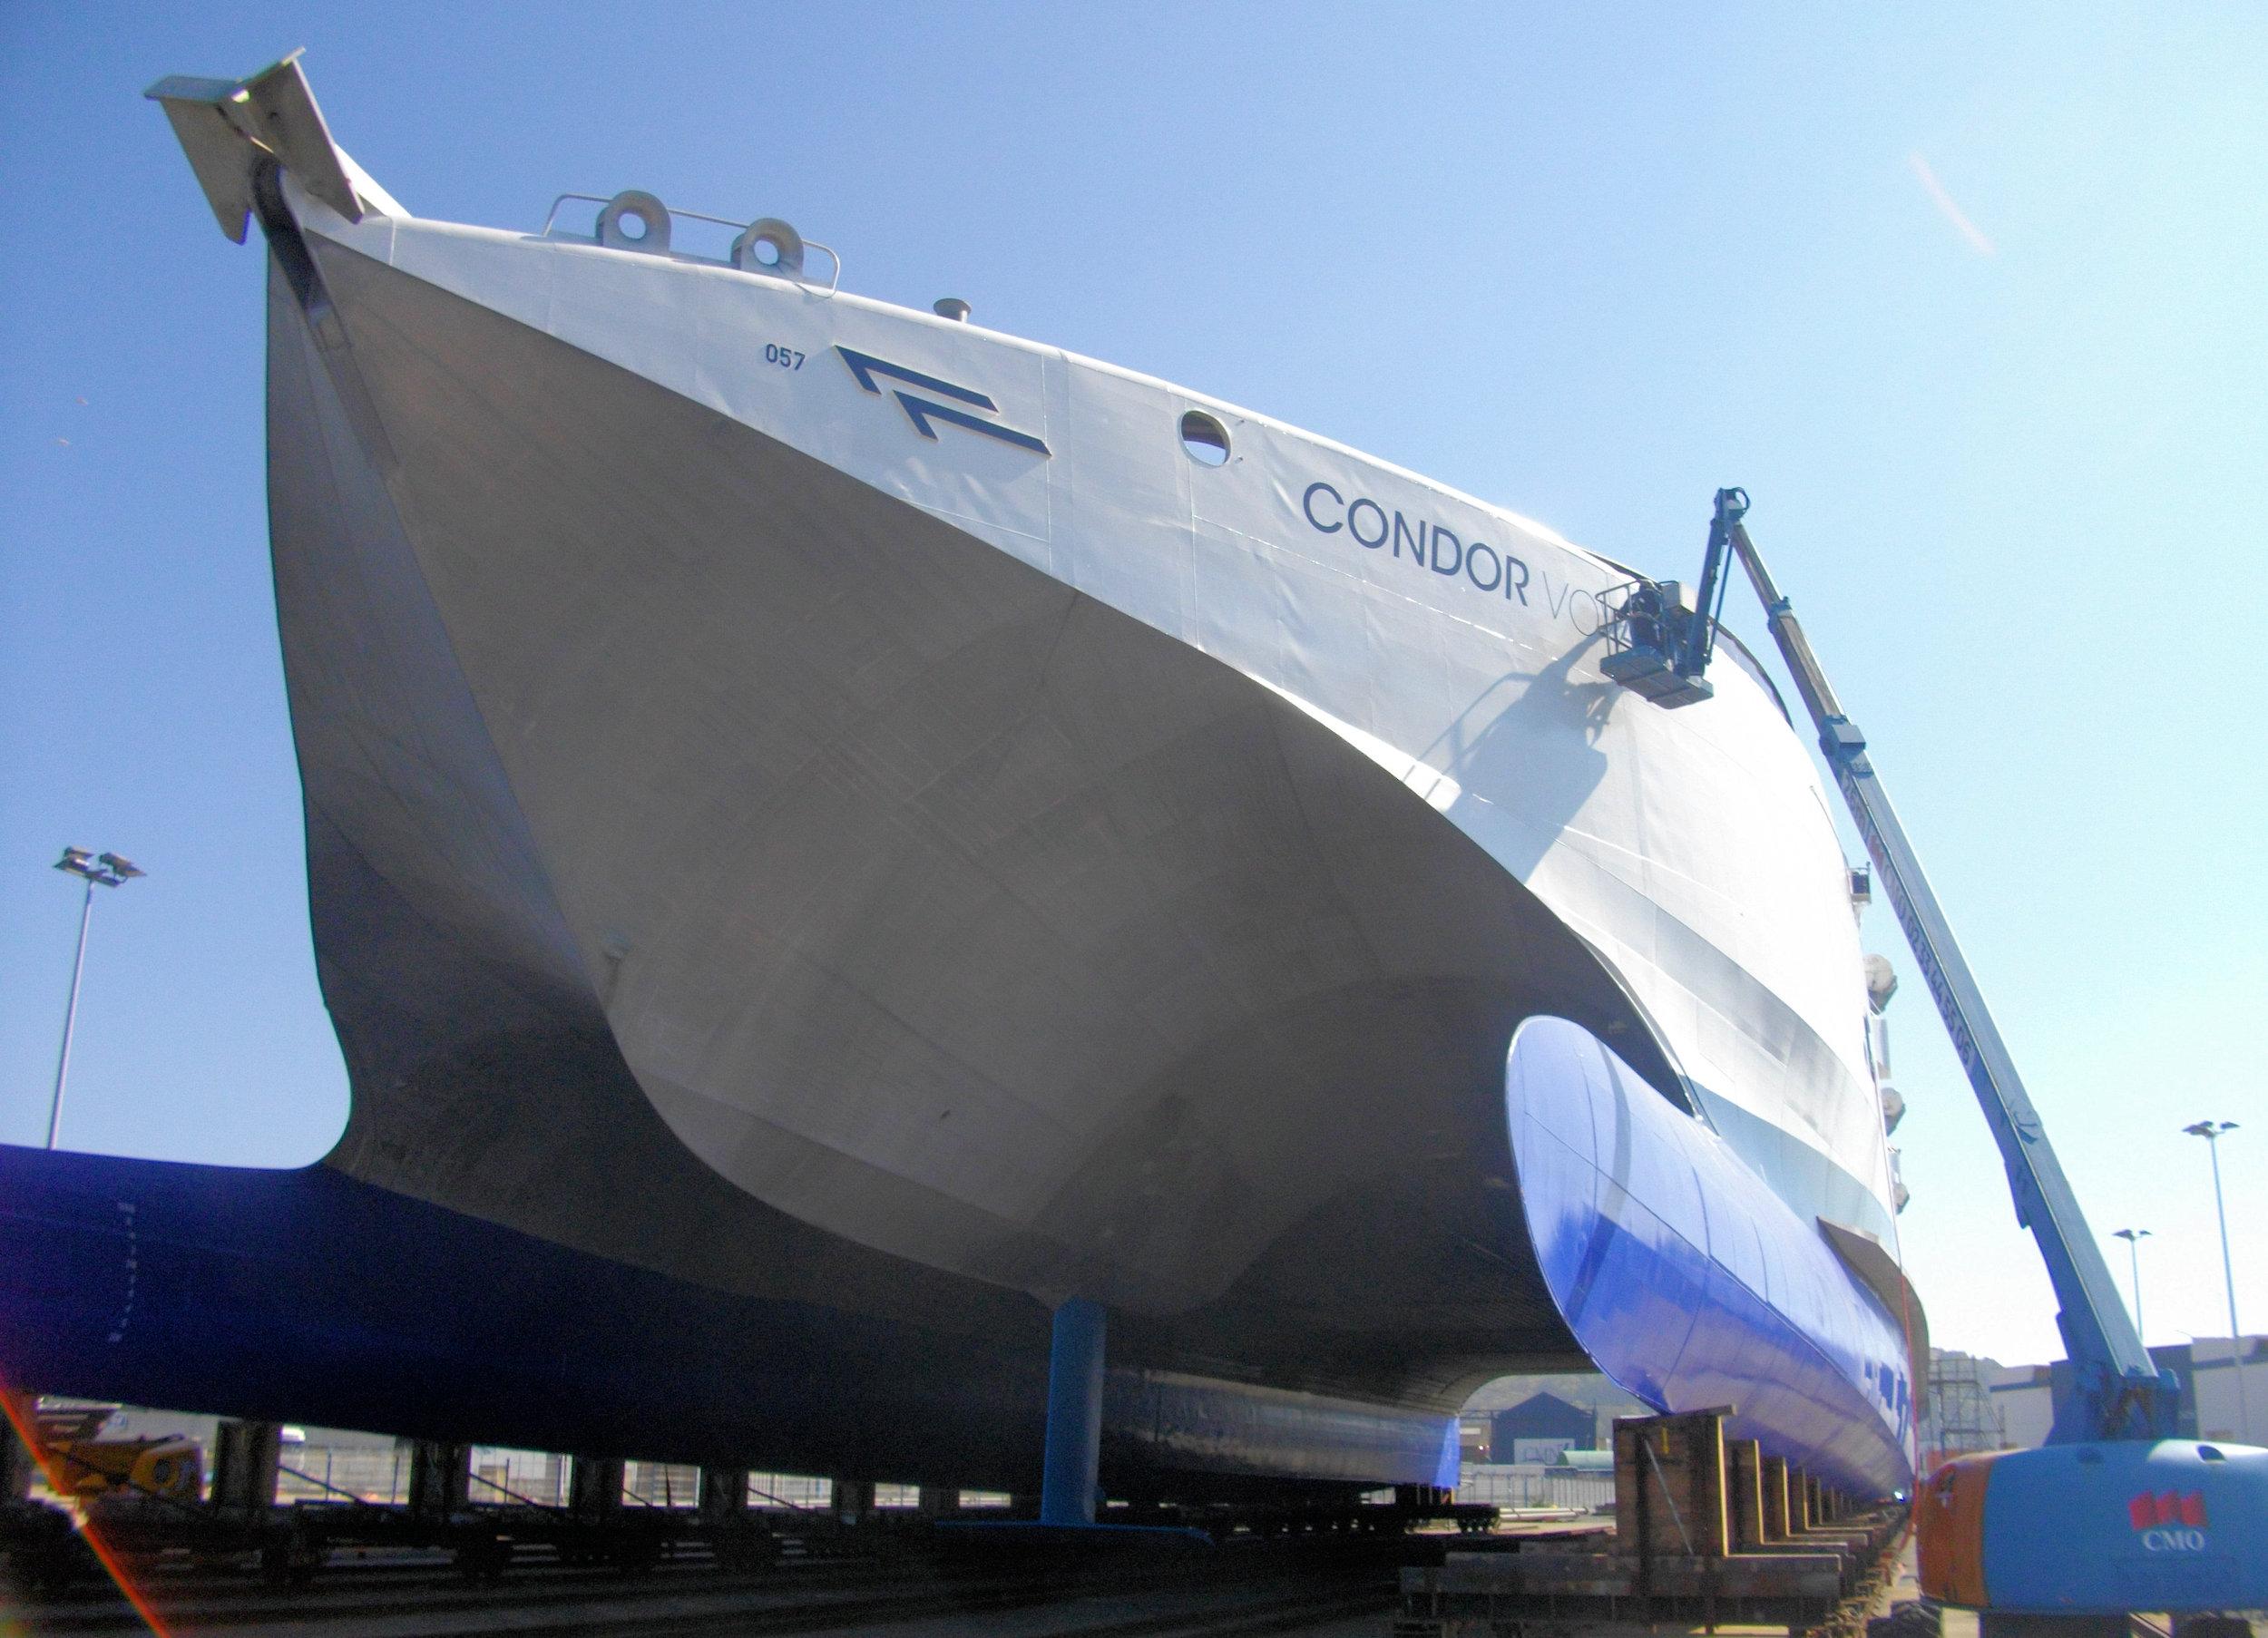 Condor Voyager name being applied to the bow of the high speed catamaran 2021-04-23